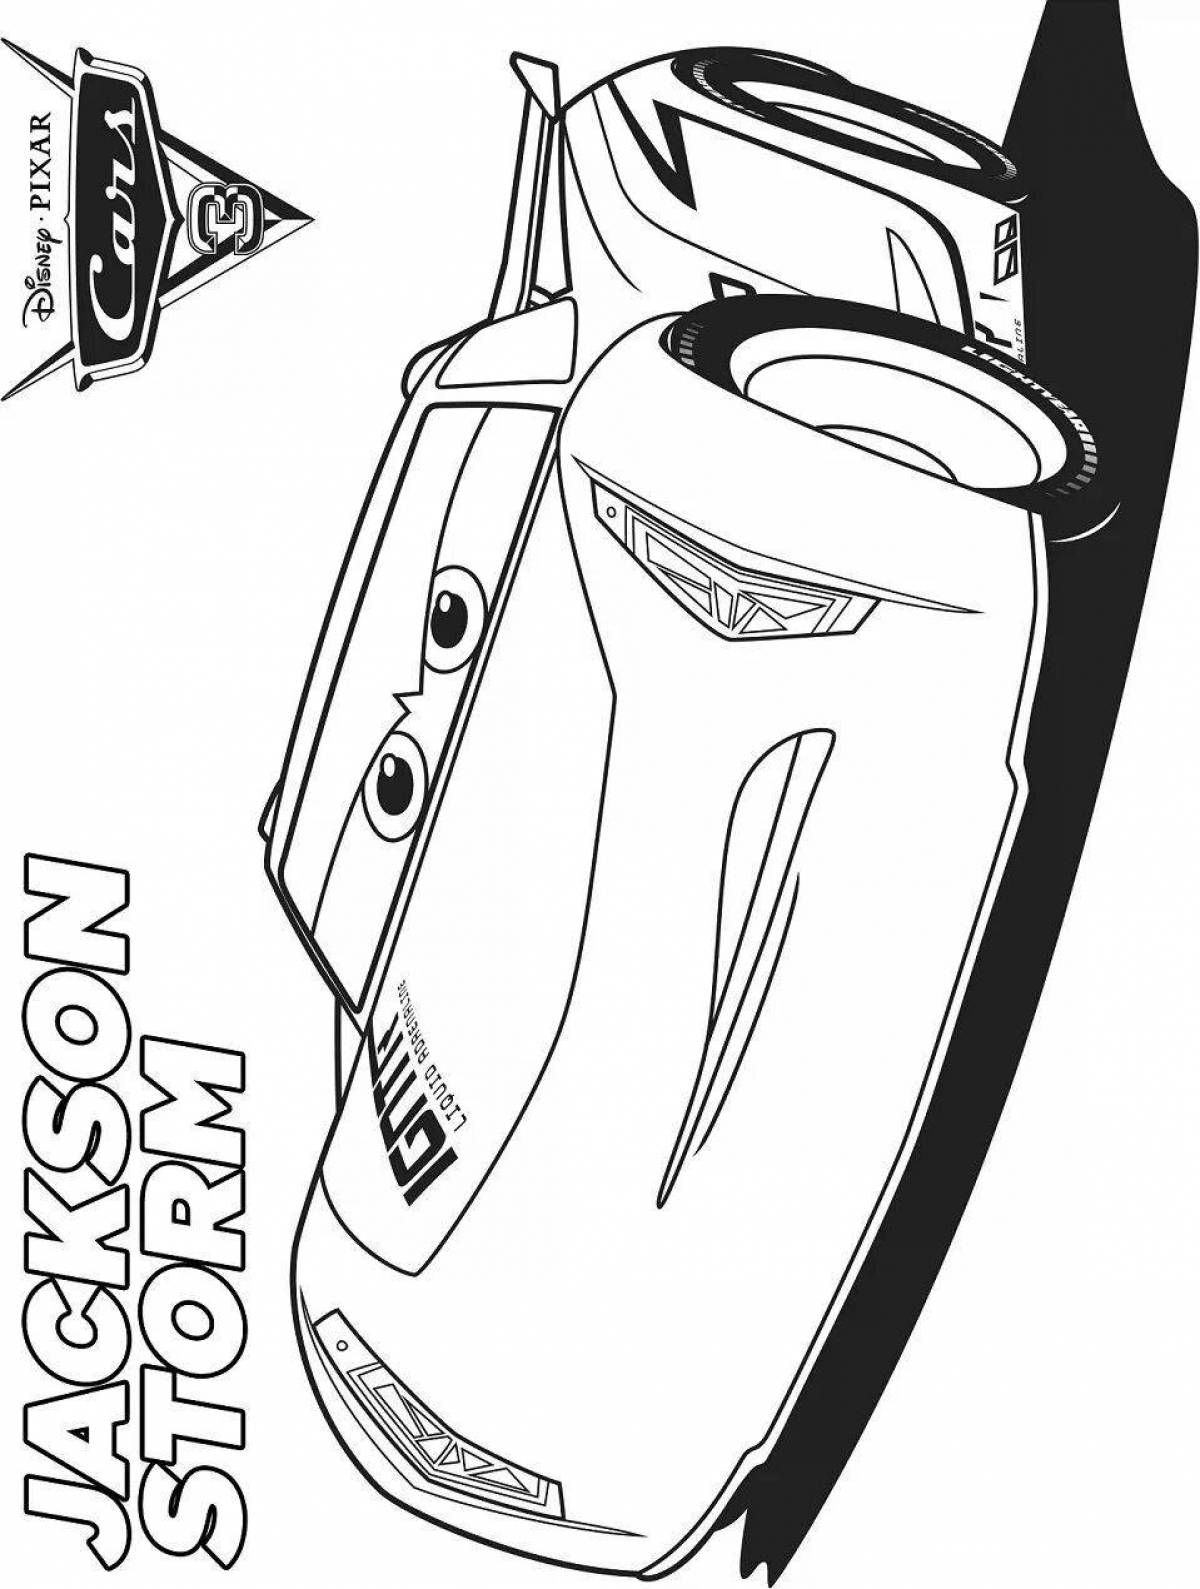 Jackson storm's playful coloring page